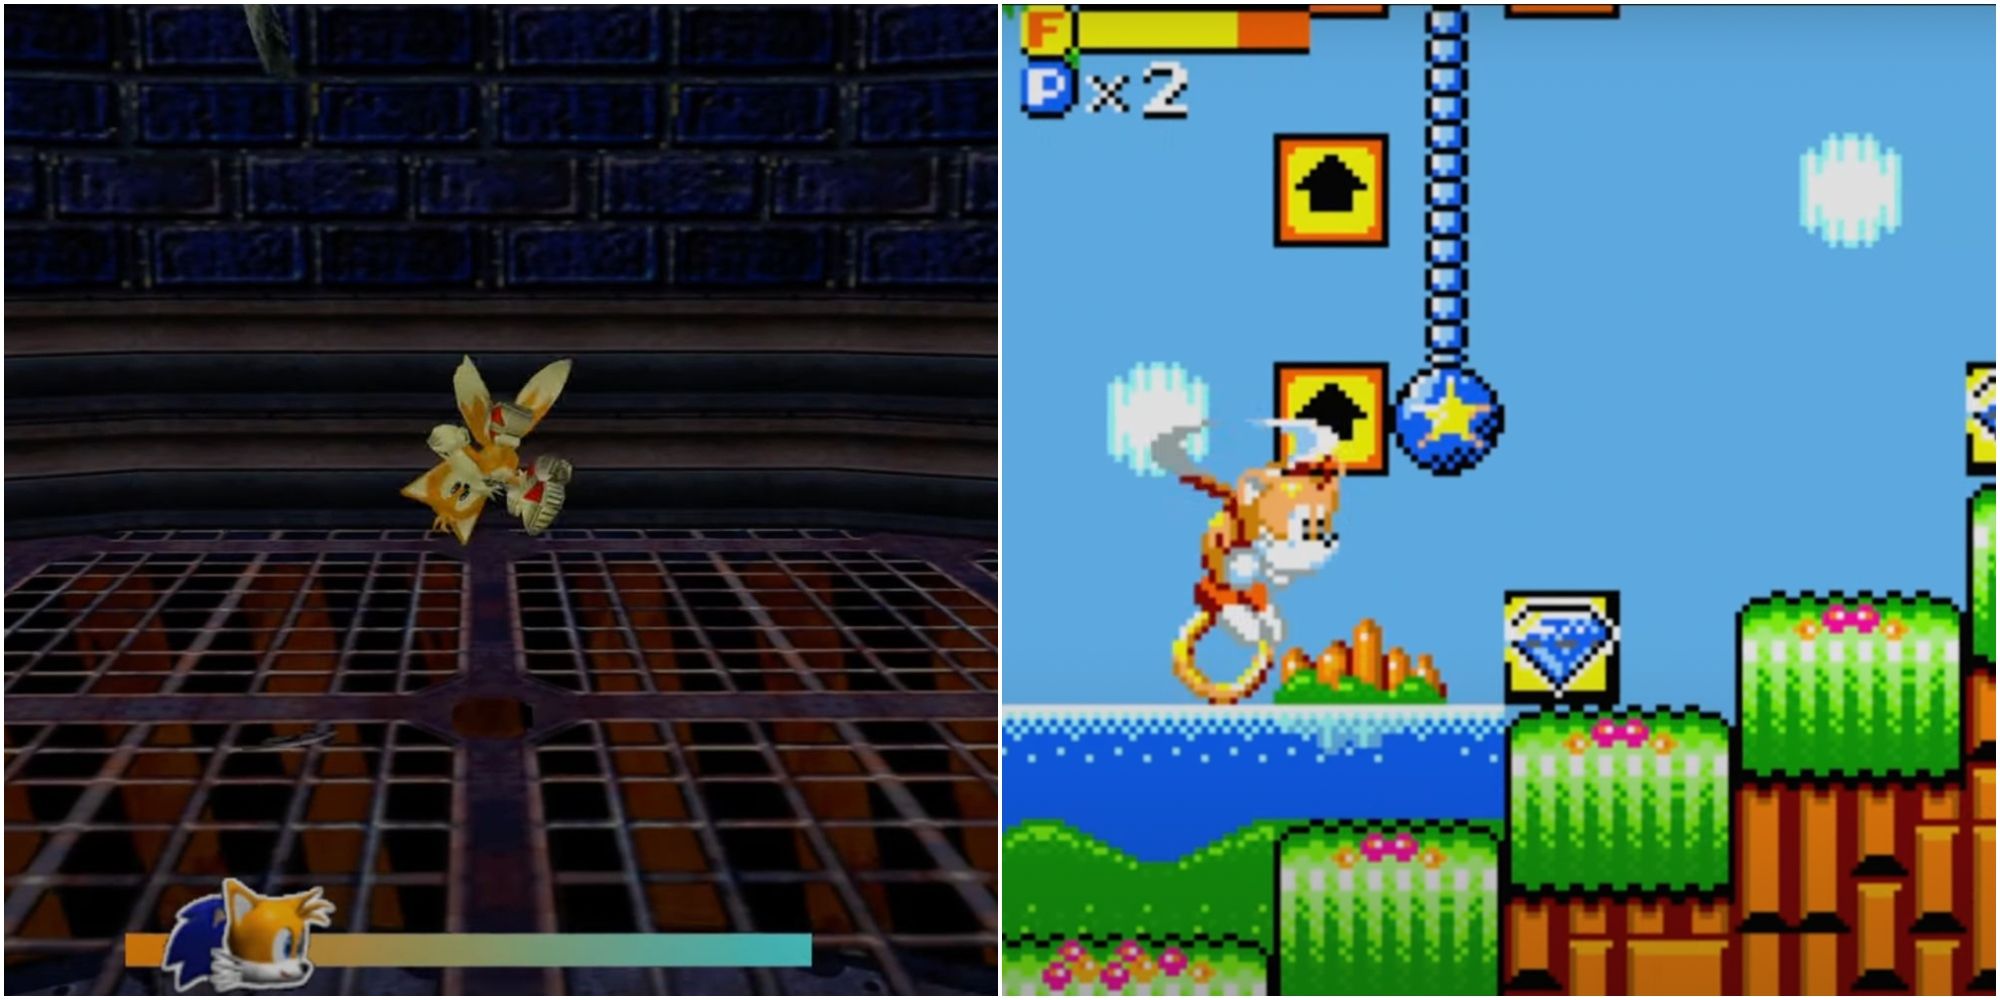 Tails floating upside down over a big fan beside Tails flying through a level holding a coin